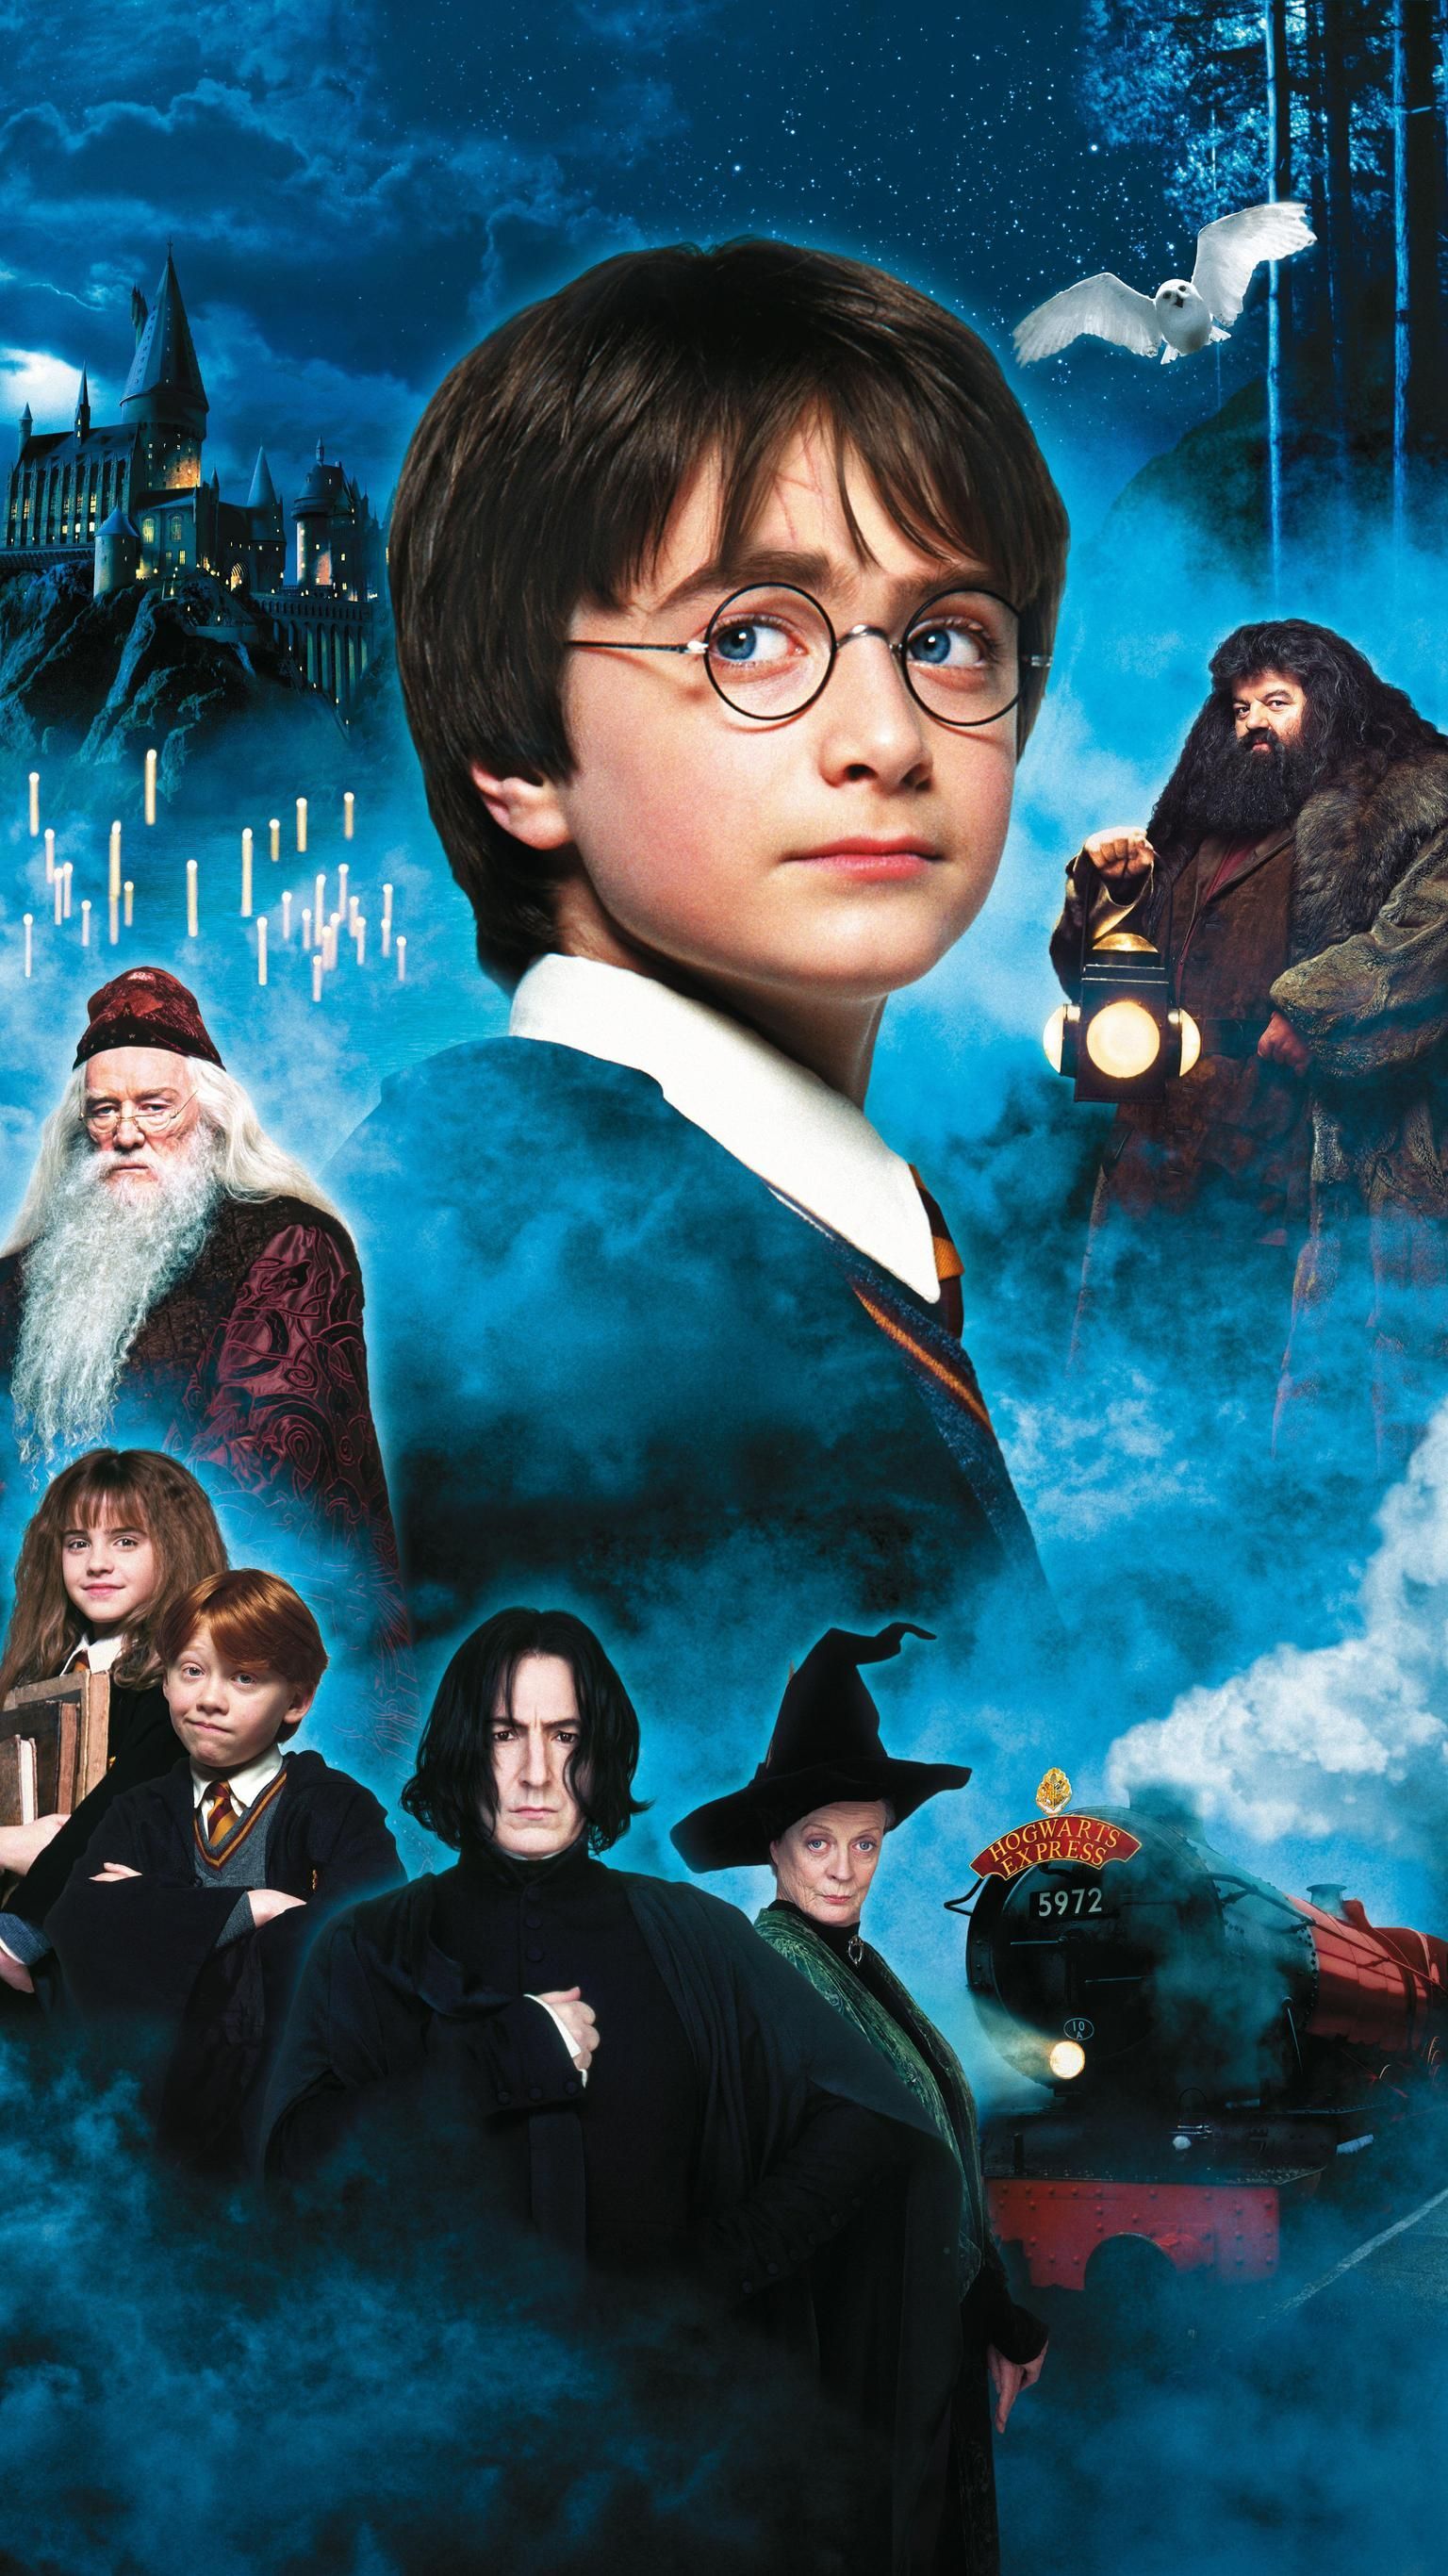 Harry Potter and the Philosopher's Stone (2001) Phone Wallpaper. Moviemania. Harry potter phone, Harry potter picture, Harry potter poster